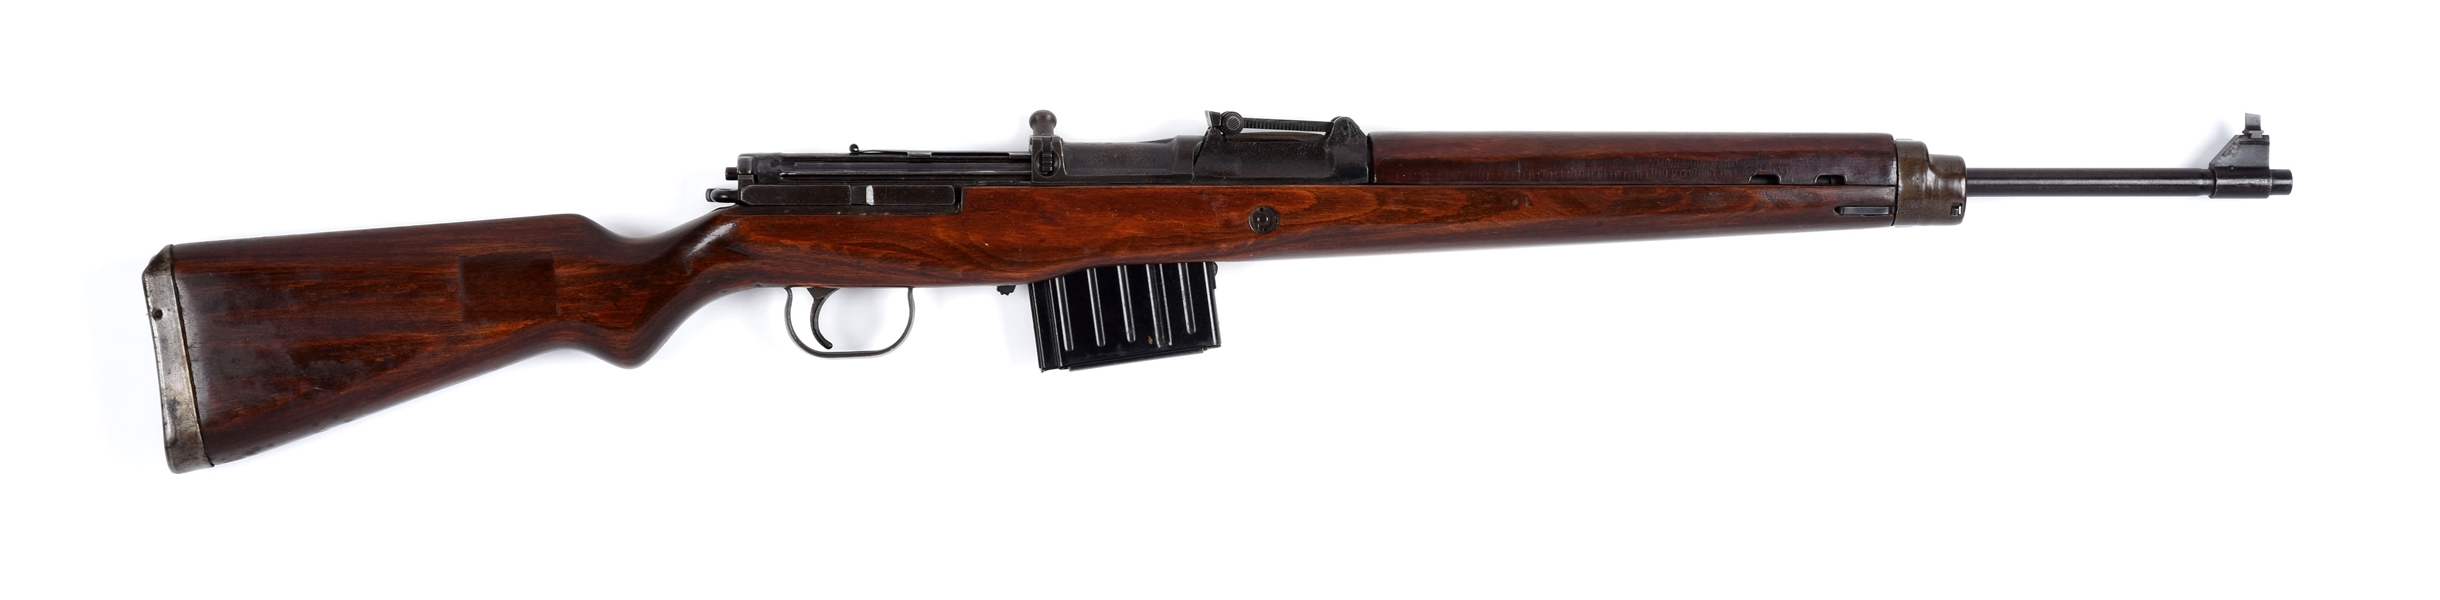 (C) GERMAN WALTHER K-43 MODEL G CODE QVE 1945 DATED RIFLE.